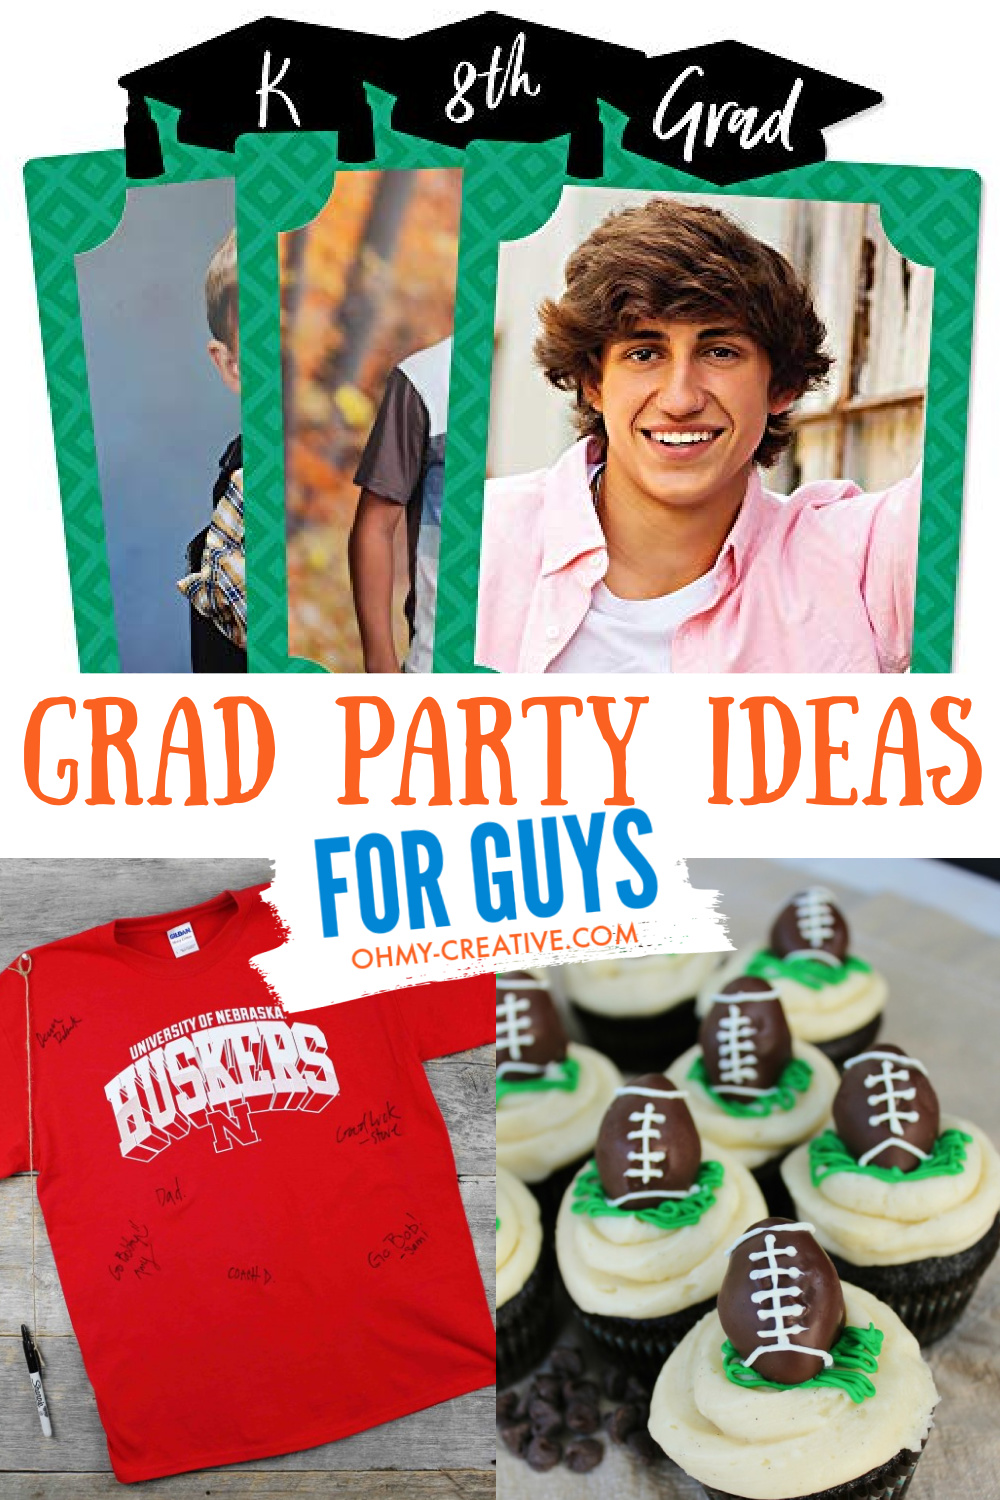 A collage with graduation party ideas for guys. Including dessert tables, graduation party decorations and centerpieces.